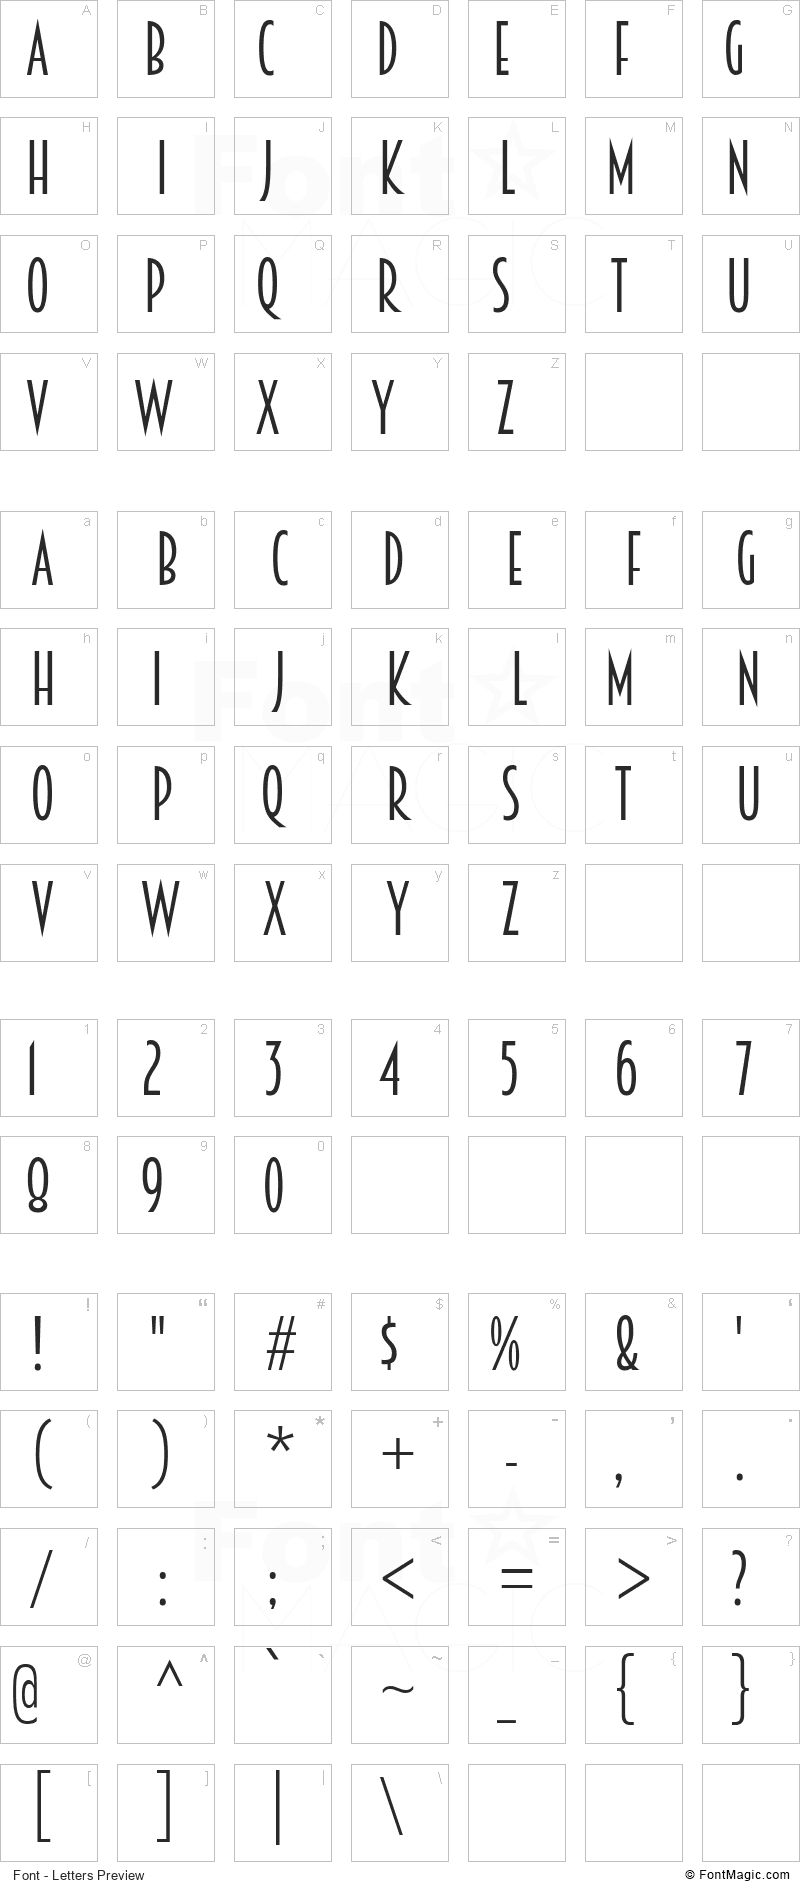 Breamcatcher Font - All Latters Preview Chart